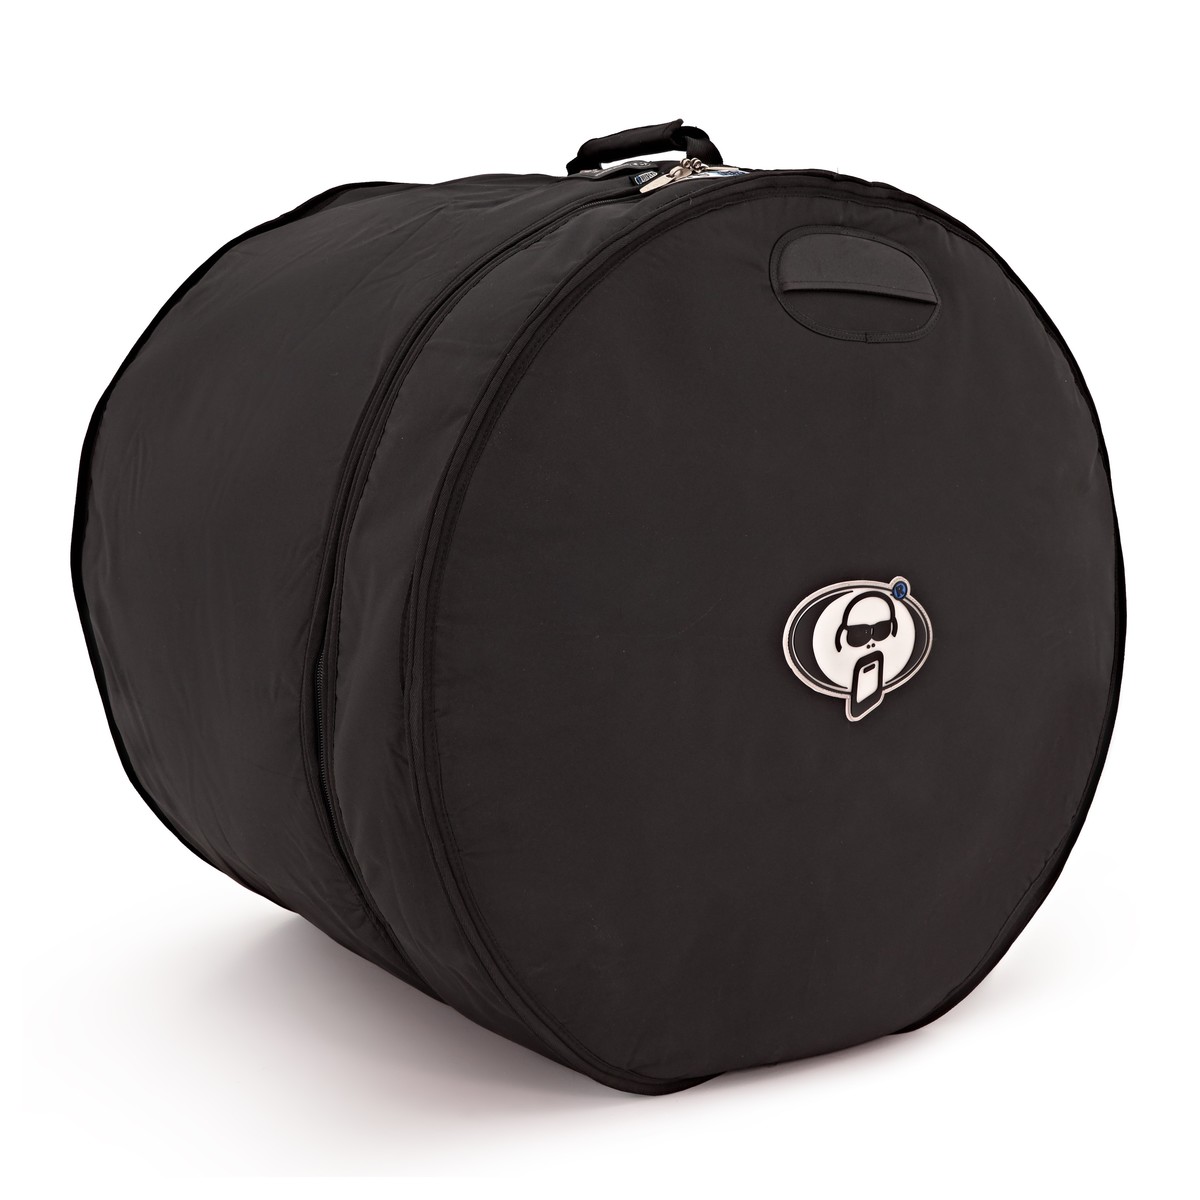 An image of Protection Racket 24 X 20 Bass Drum Case | PMT Online